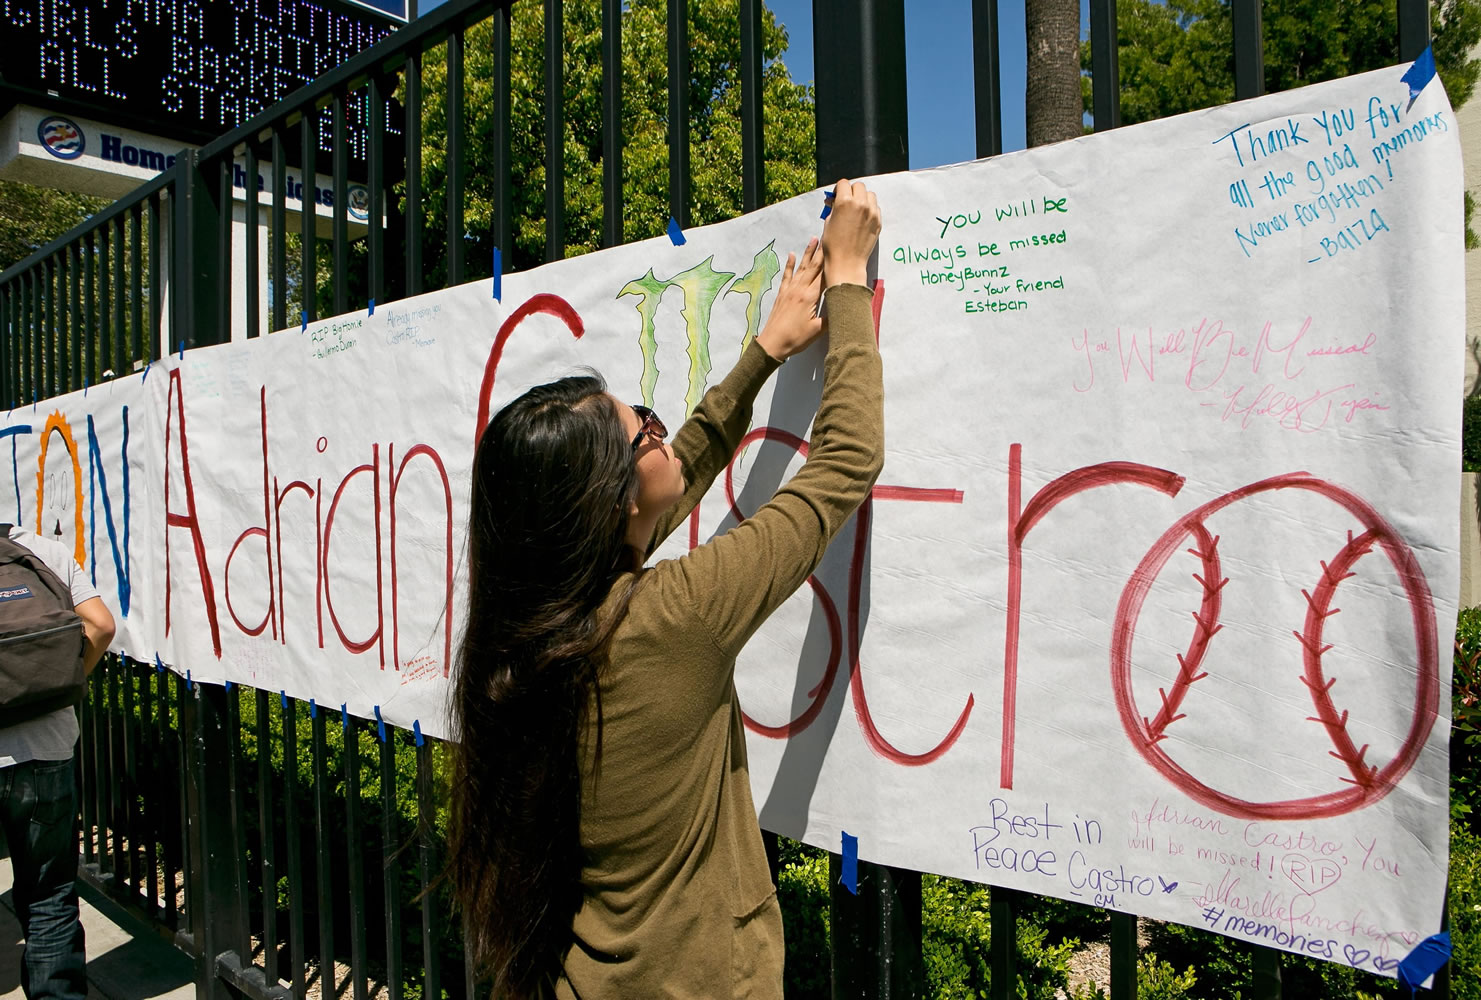 An El Monte High School student hangs a banner for senior Adrian Castro, outside El Monte High School in El Monte, Calif., Friday. Castro was killed when the Humboldt State University-bound bus he was on crashed in Orland on Thursday, an El Monte school official said.